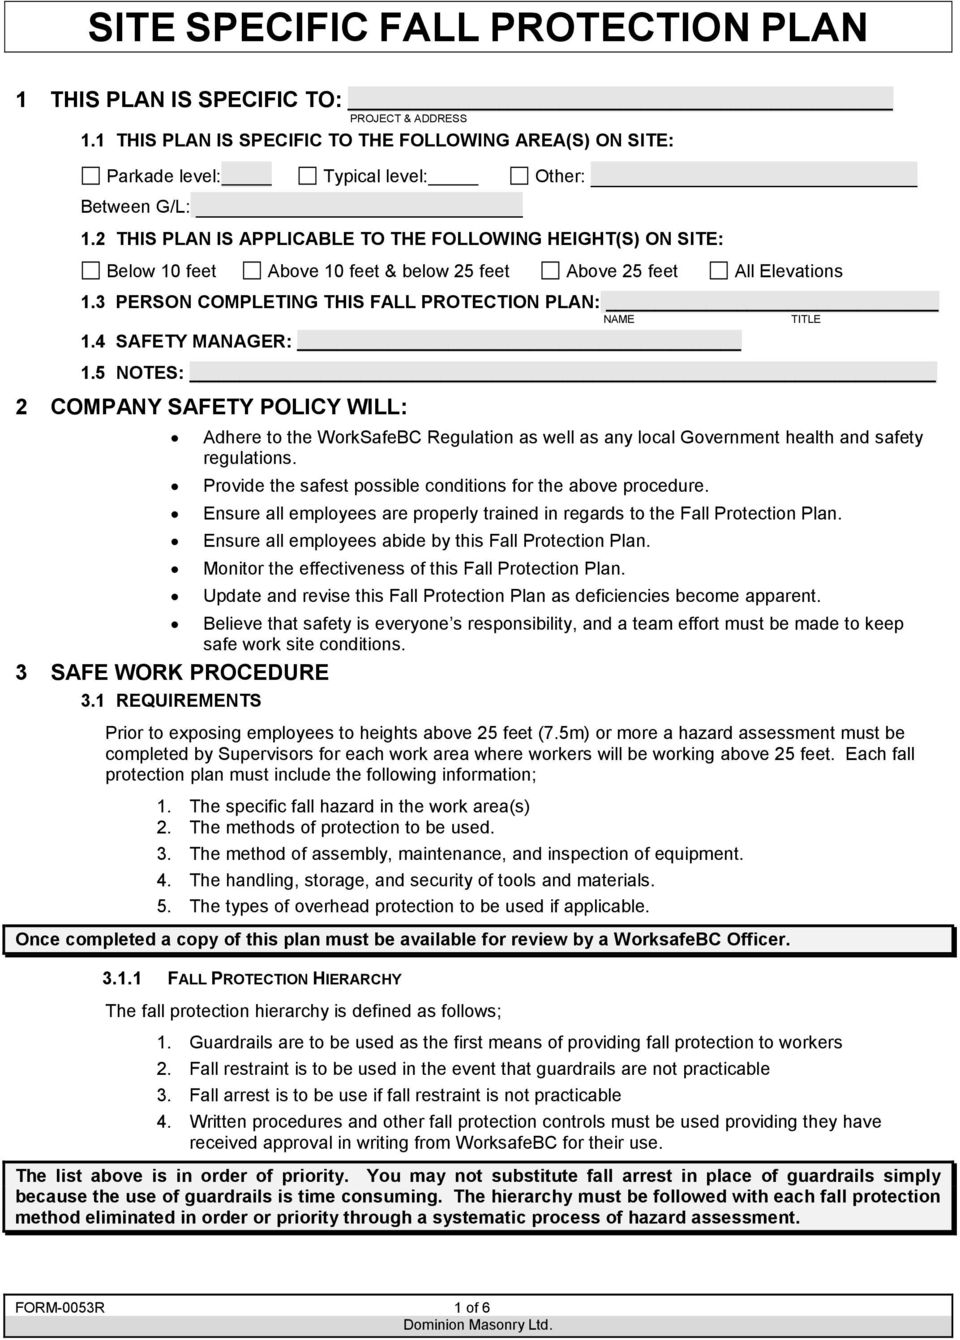 SITE SPECIFIC FALL PROTECTION PLAN - PDF Free Download Regarding Fall Protection Certification Template